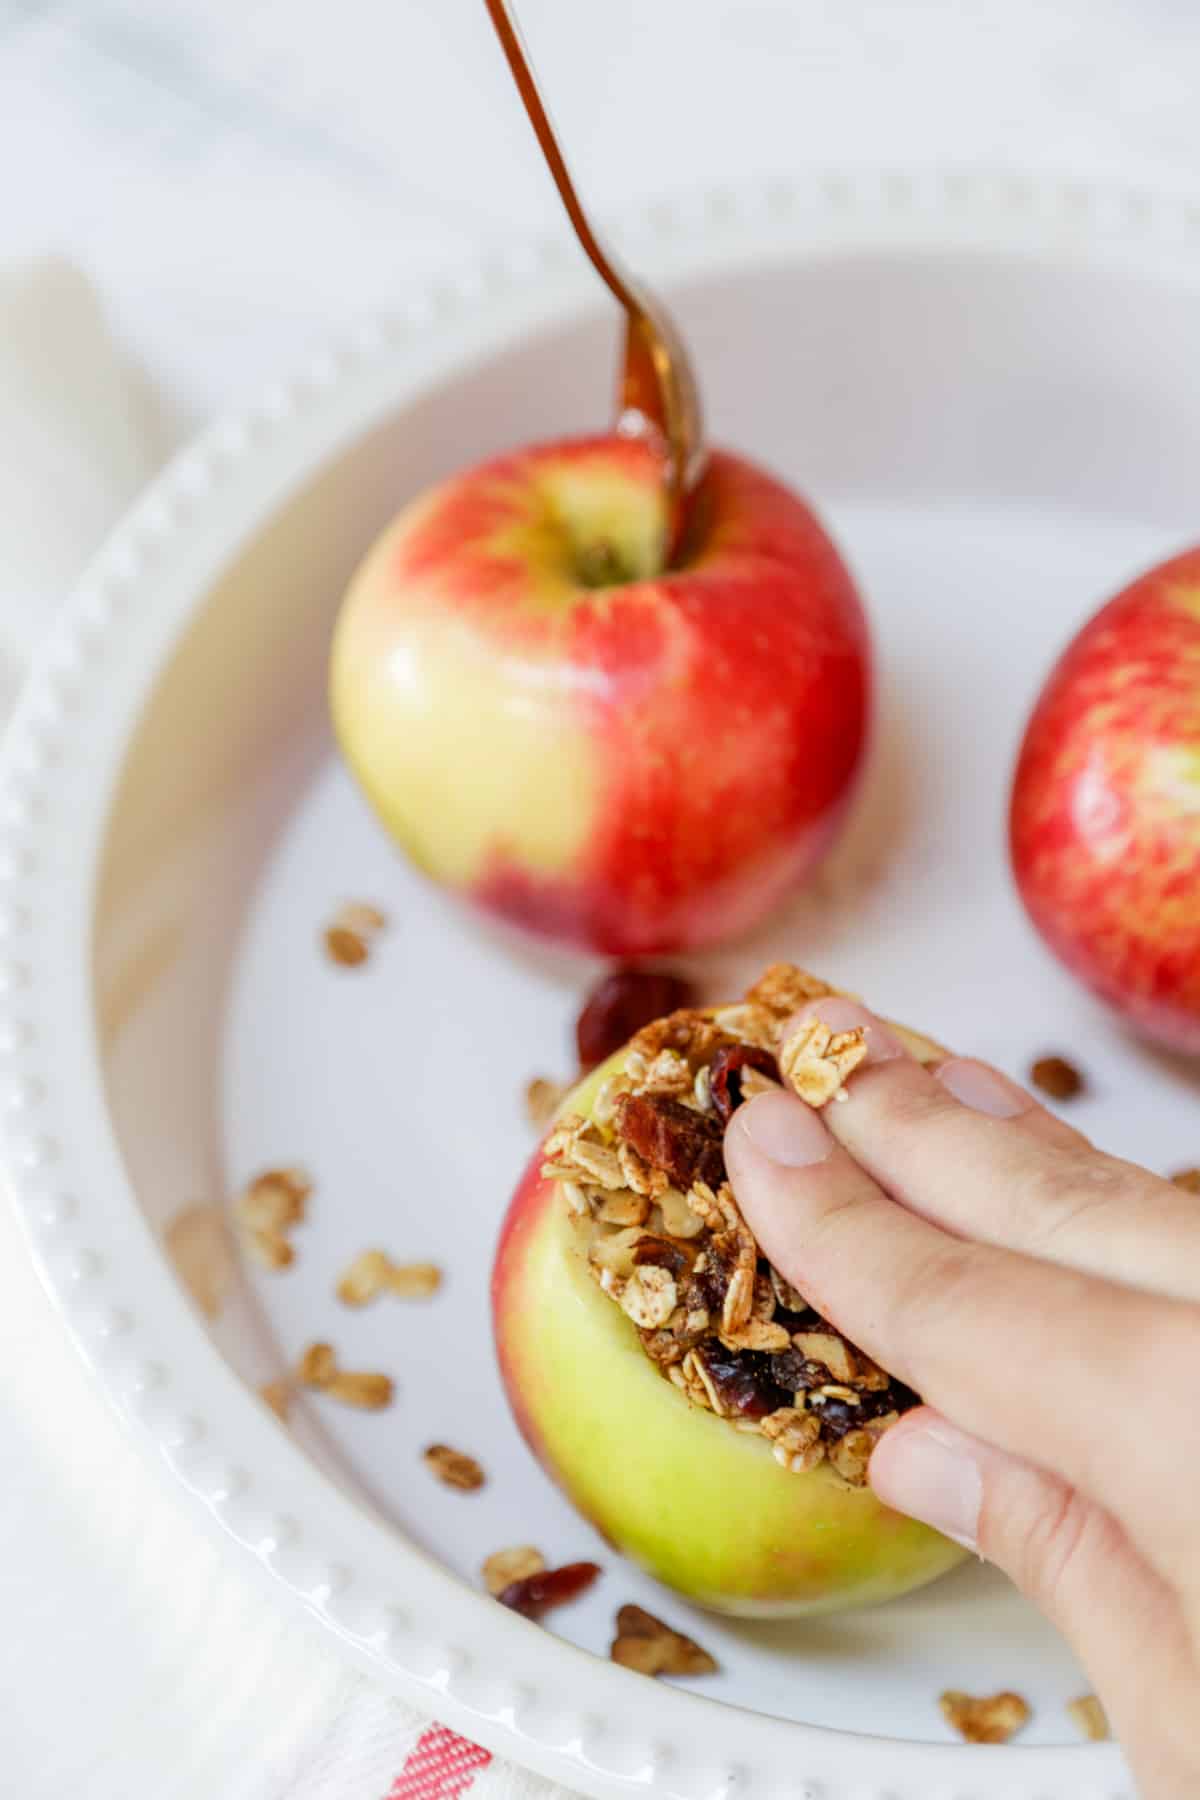 A hand pressing oat filling into a cored apple with whole apples next to the stuffed apple.